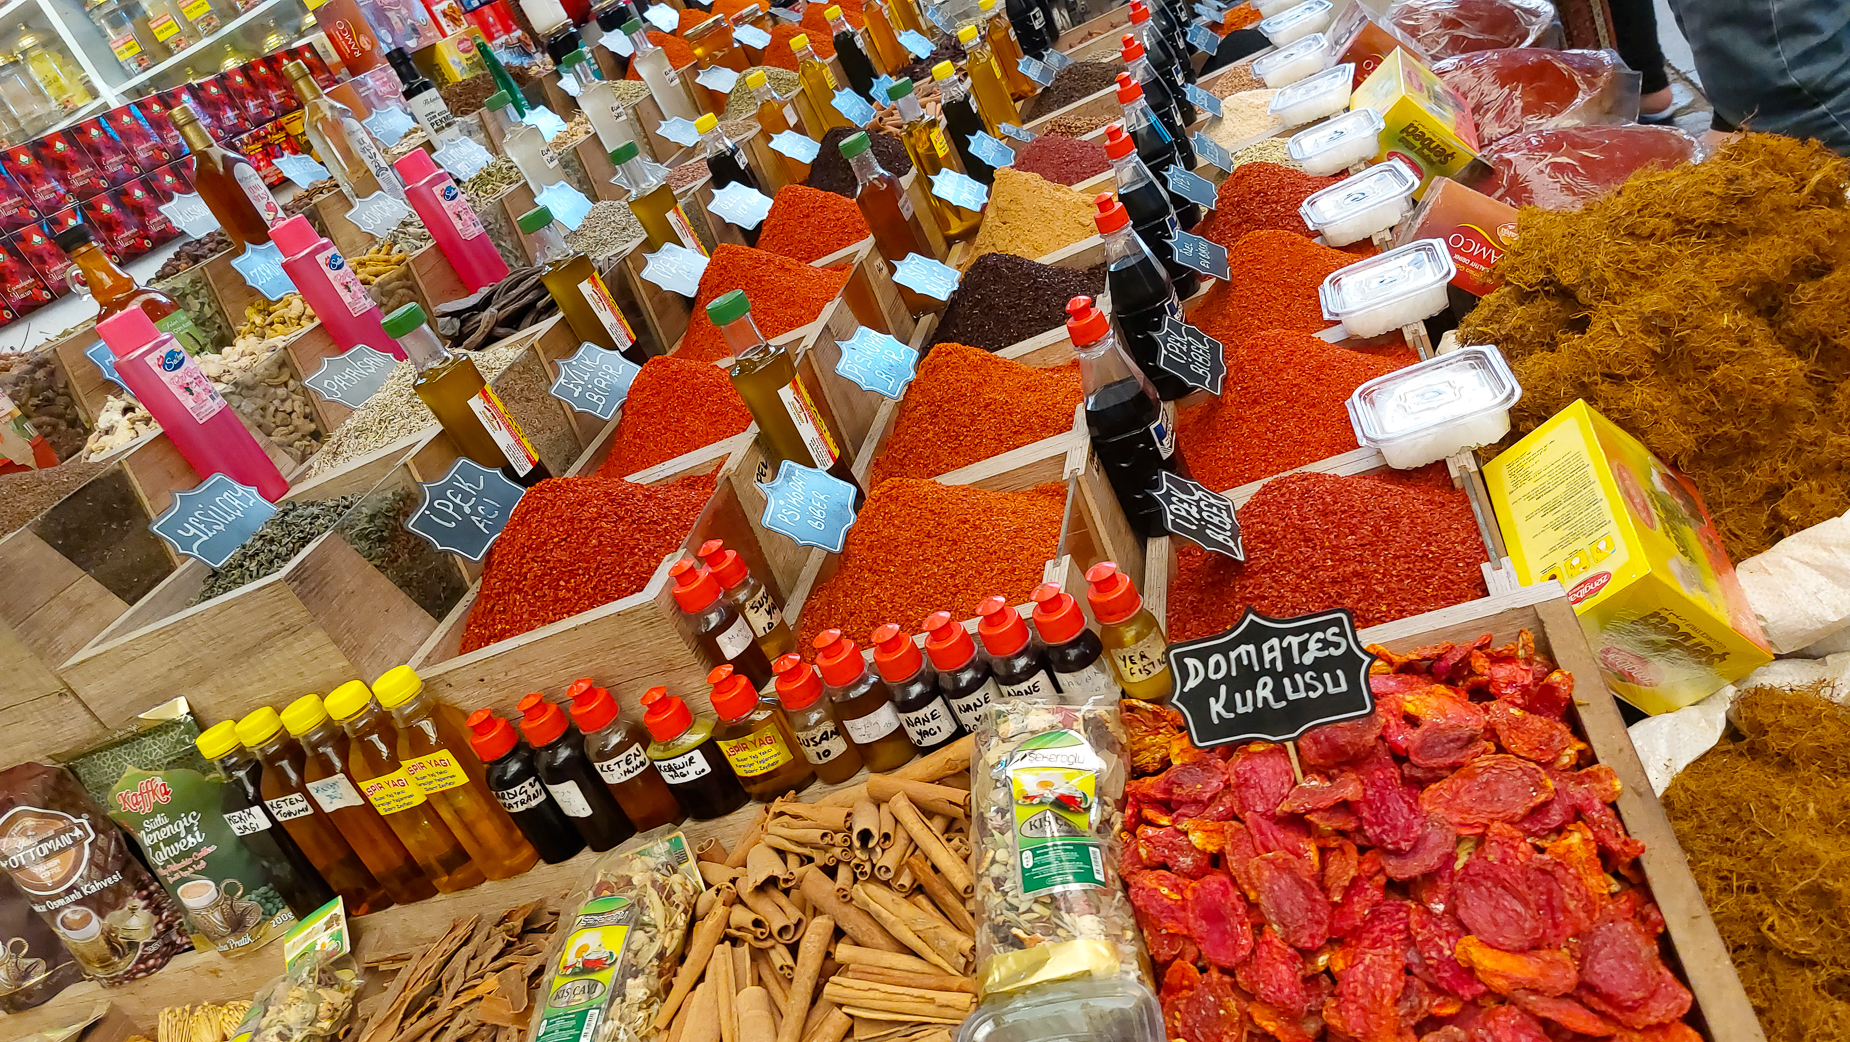 <span  class="uc_style_uc_tiles_grid_image_elementor_uc_items_attribute_title" style="color:#ffffff;">spices, so nice and mouth-watering</span>